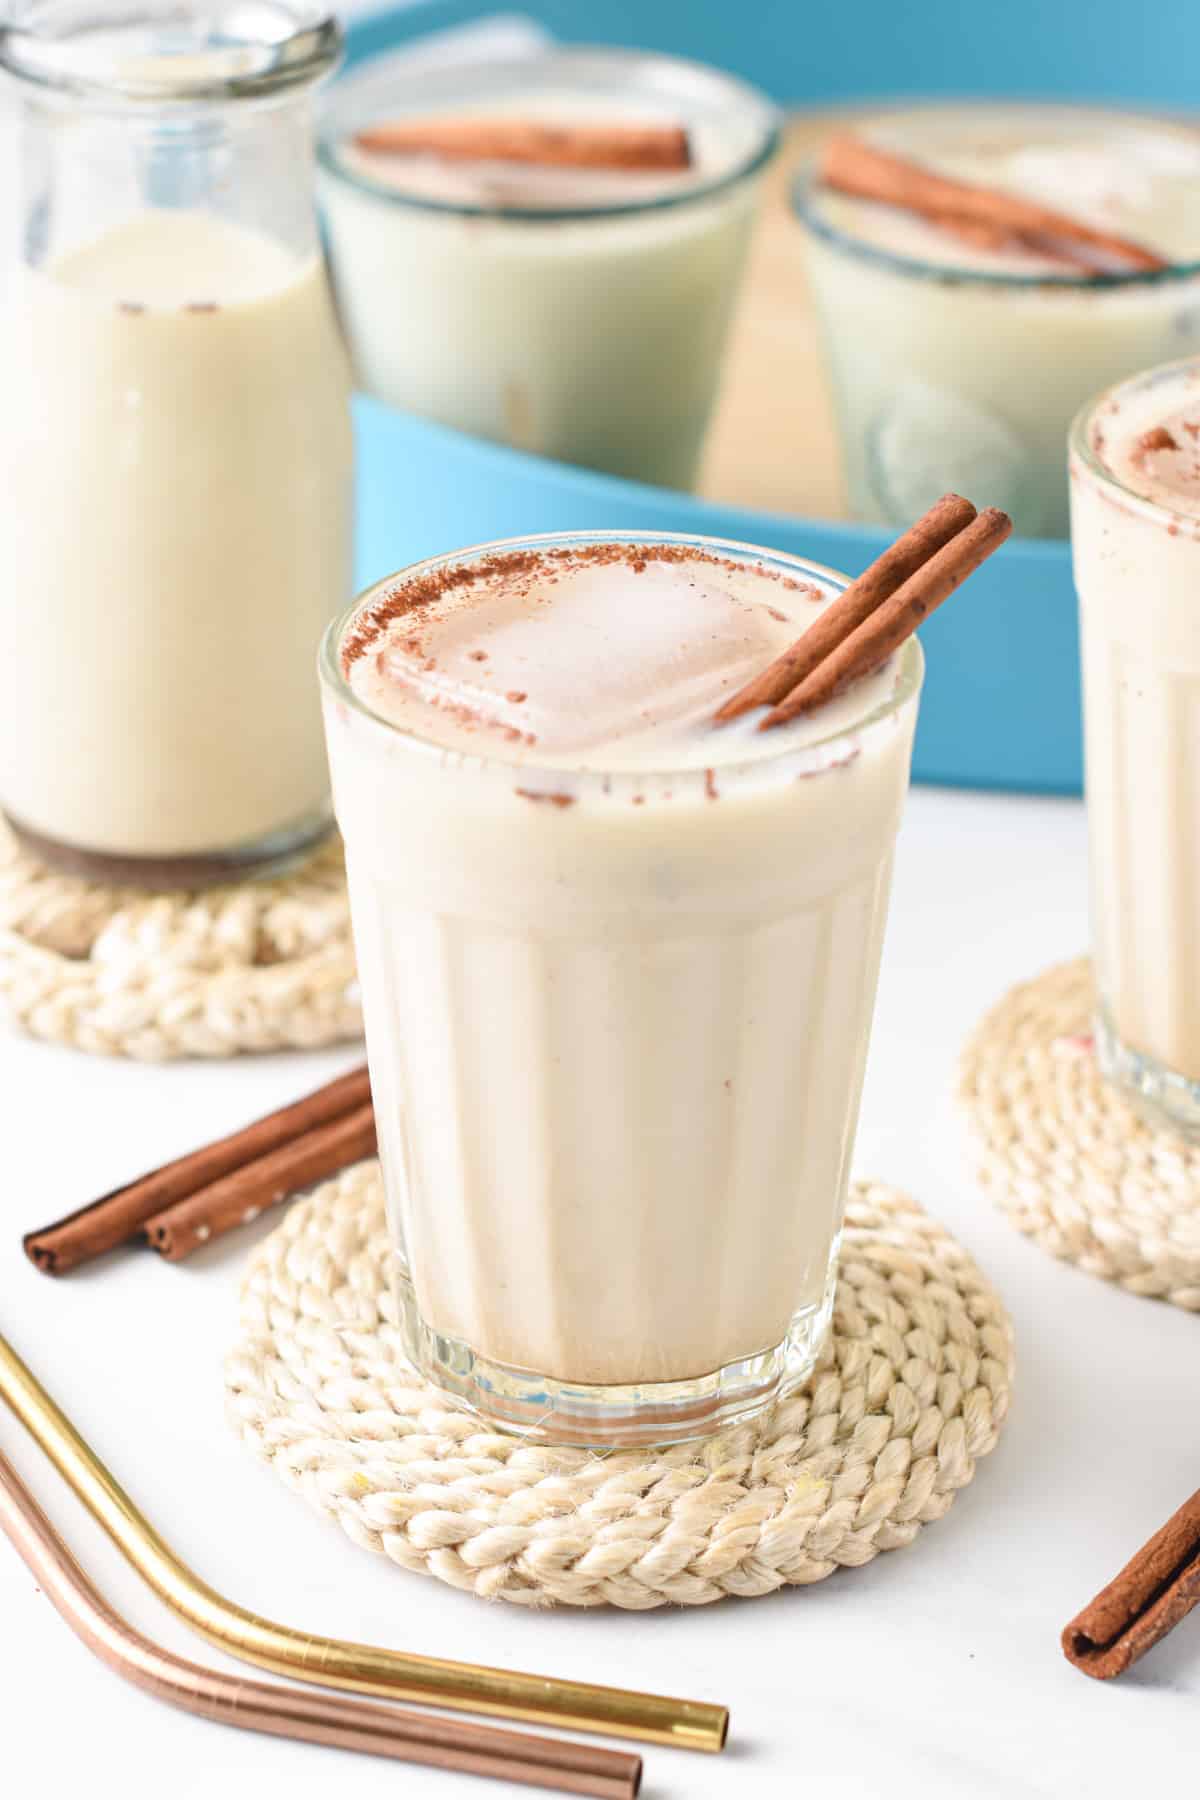 Vegan Horchata Recipe Dairy Free with Almond Milk Refined Sugar free healthy paleo The conscious plant kitchen plant based